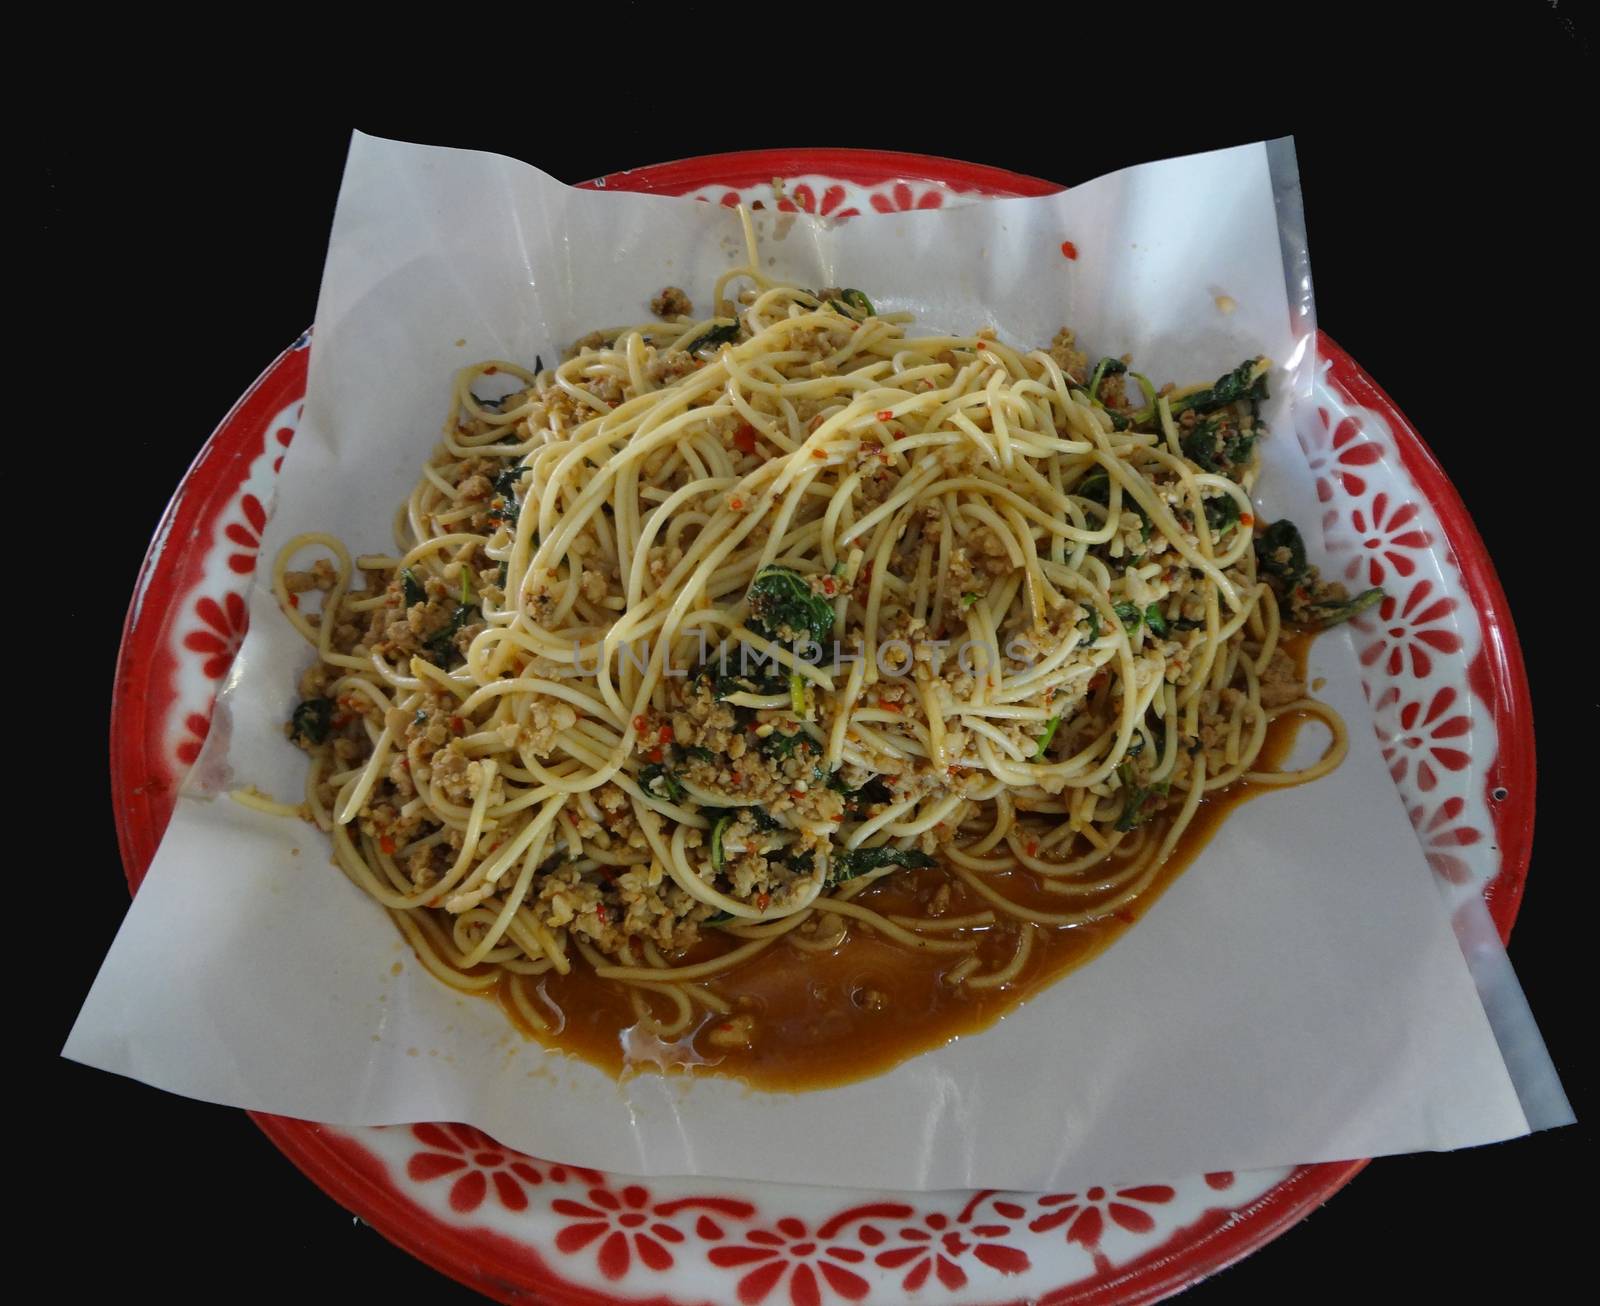 Spicy Stir Fried Spaghetti or Spicy Stir-fried Spaghetti with Chopped Chicken and holy basil on tray by ideation90